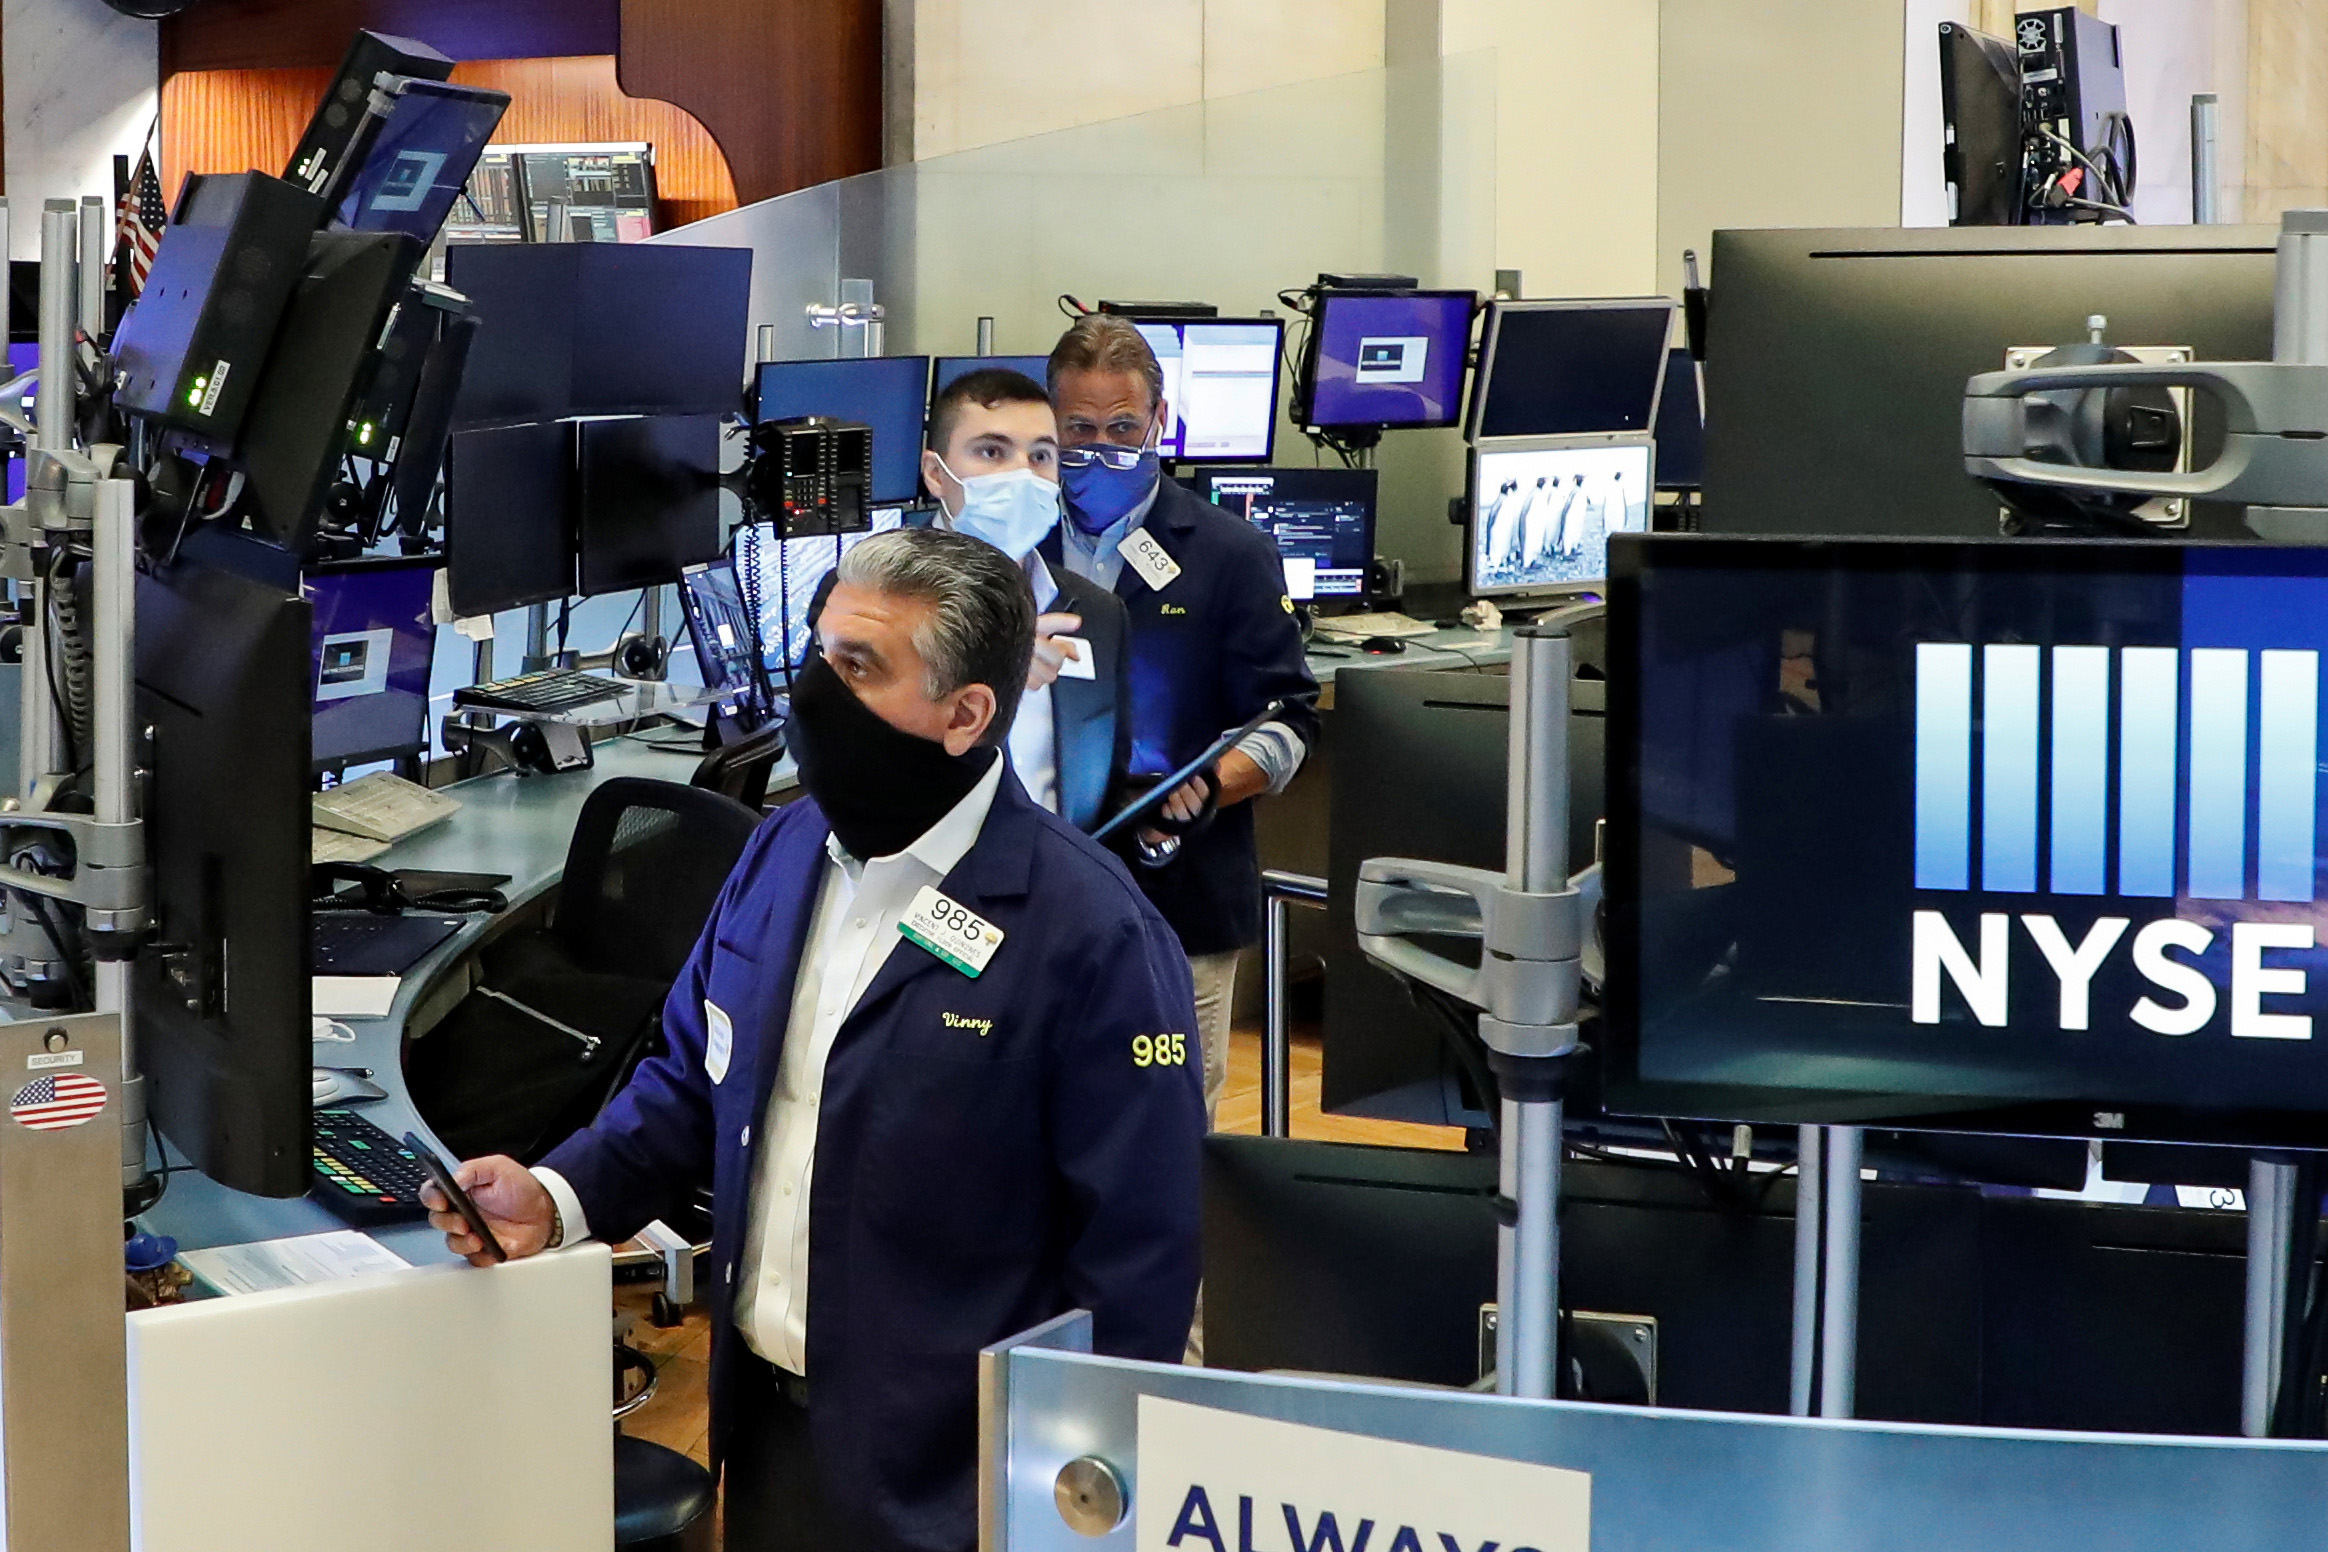 PHOTO: Traders wearing masks work, on the first day of in-person trading since the closure during the outbreak of the coronavirus (COVID-19) on the floor at the New York Stock Exchange (NYSE) in New York City, May 26, 2020.